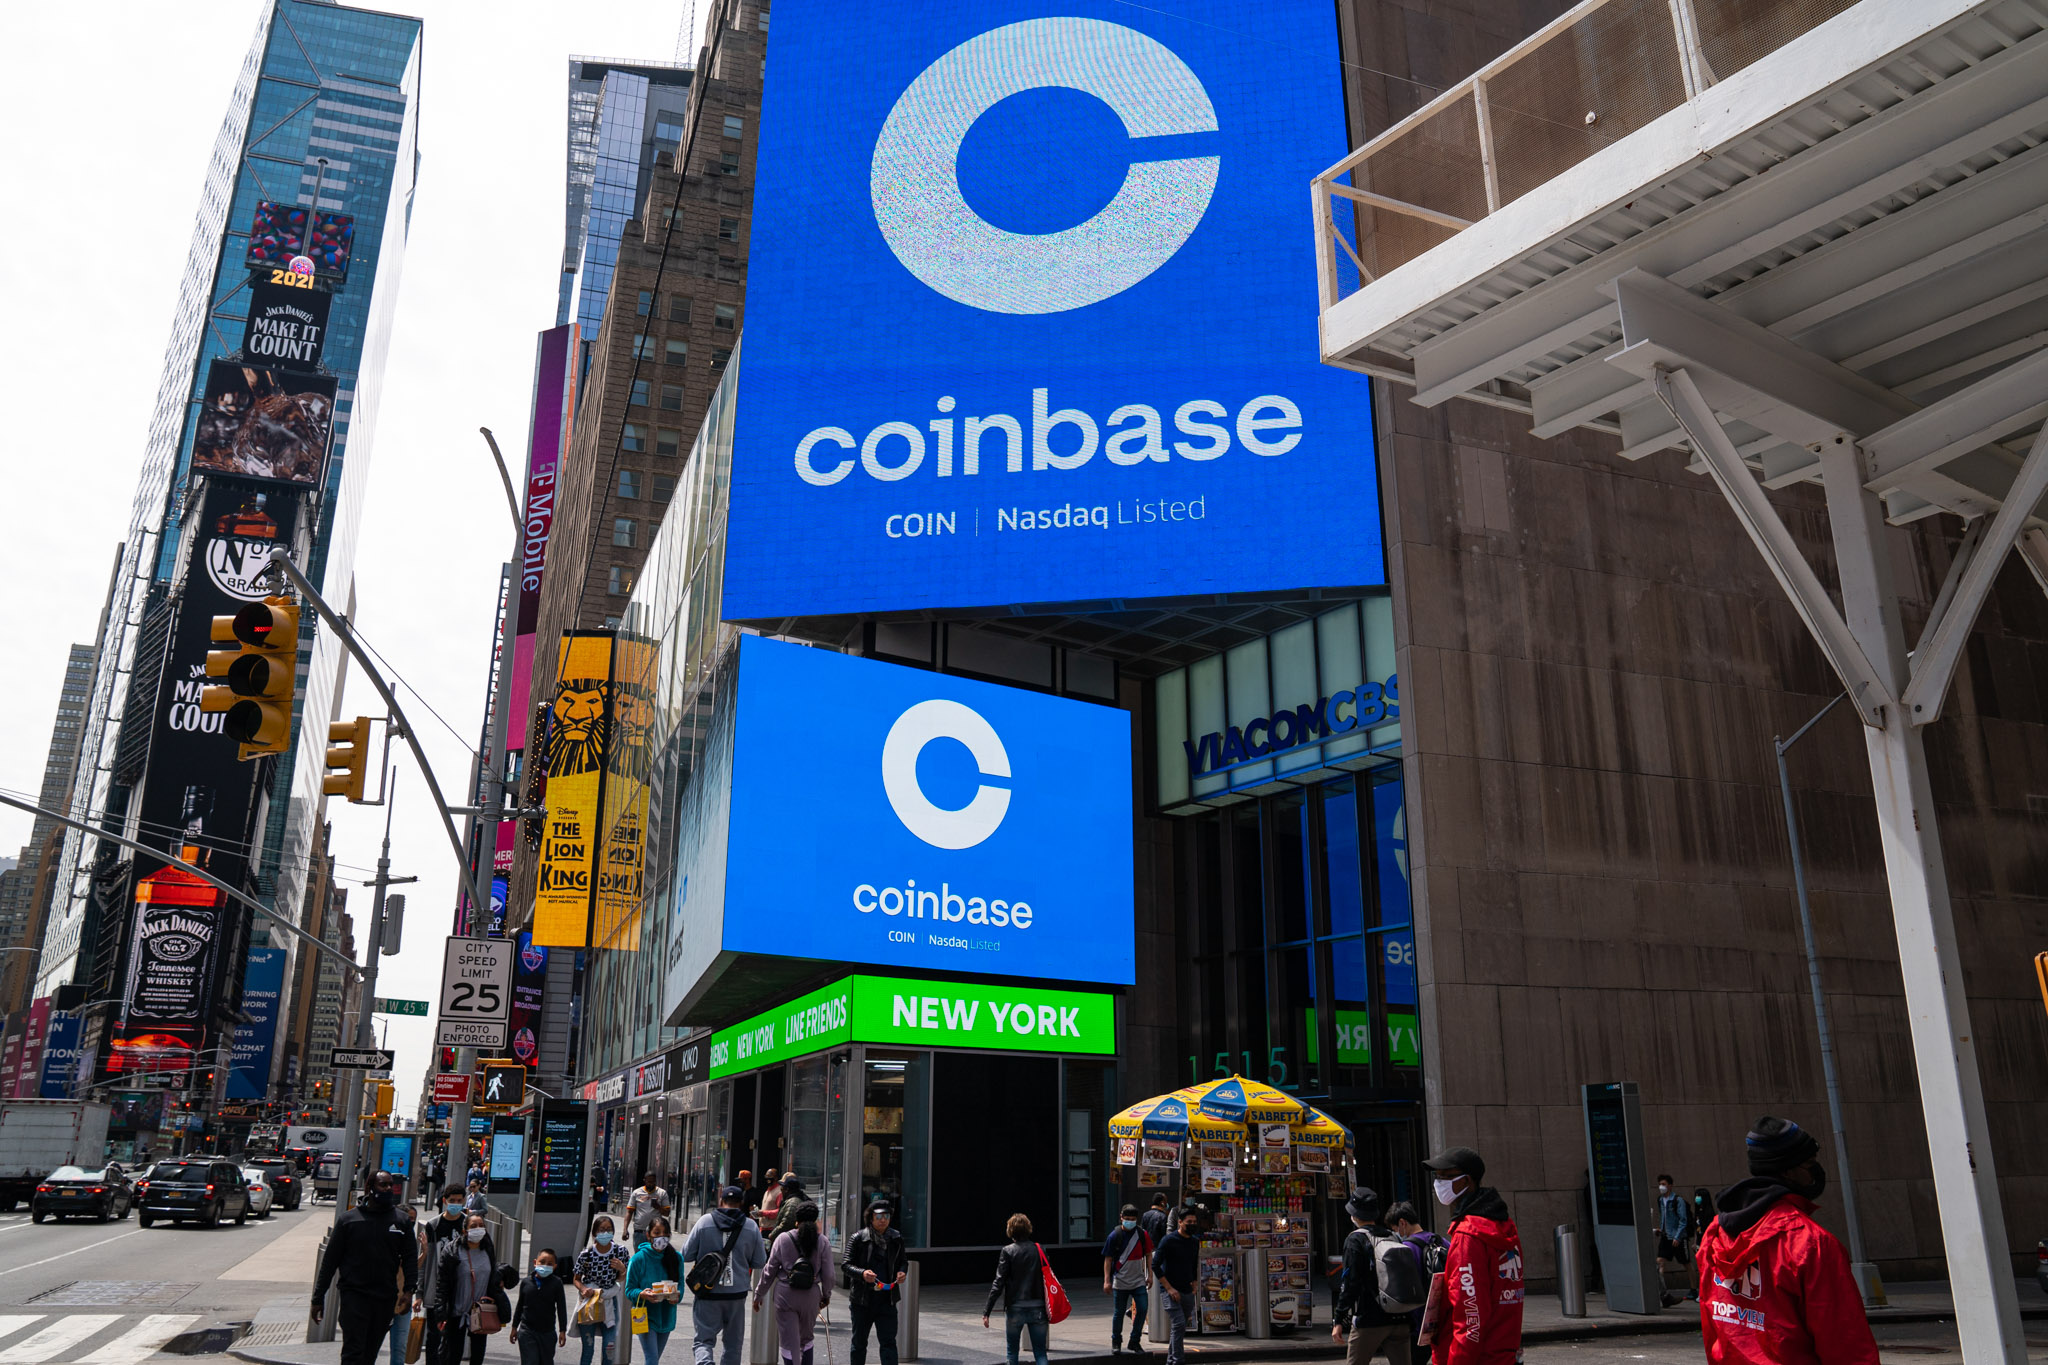 Coinbase's logo is displayed on two screens in New York City